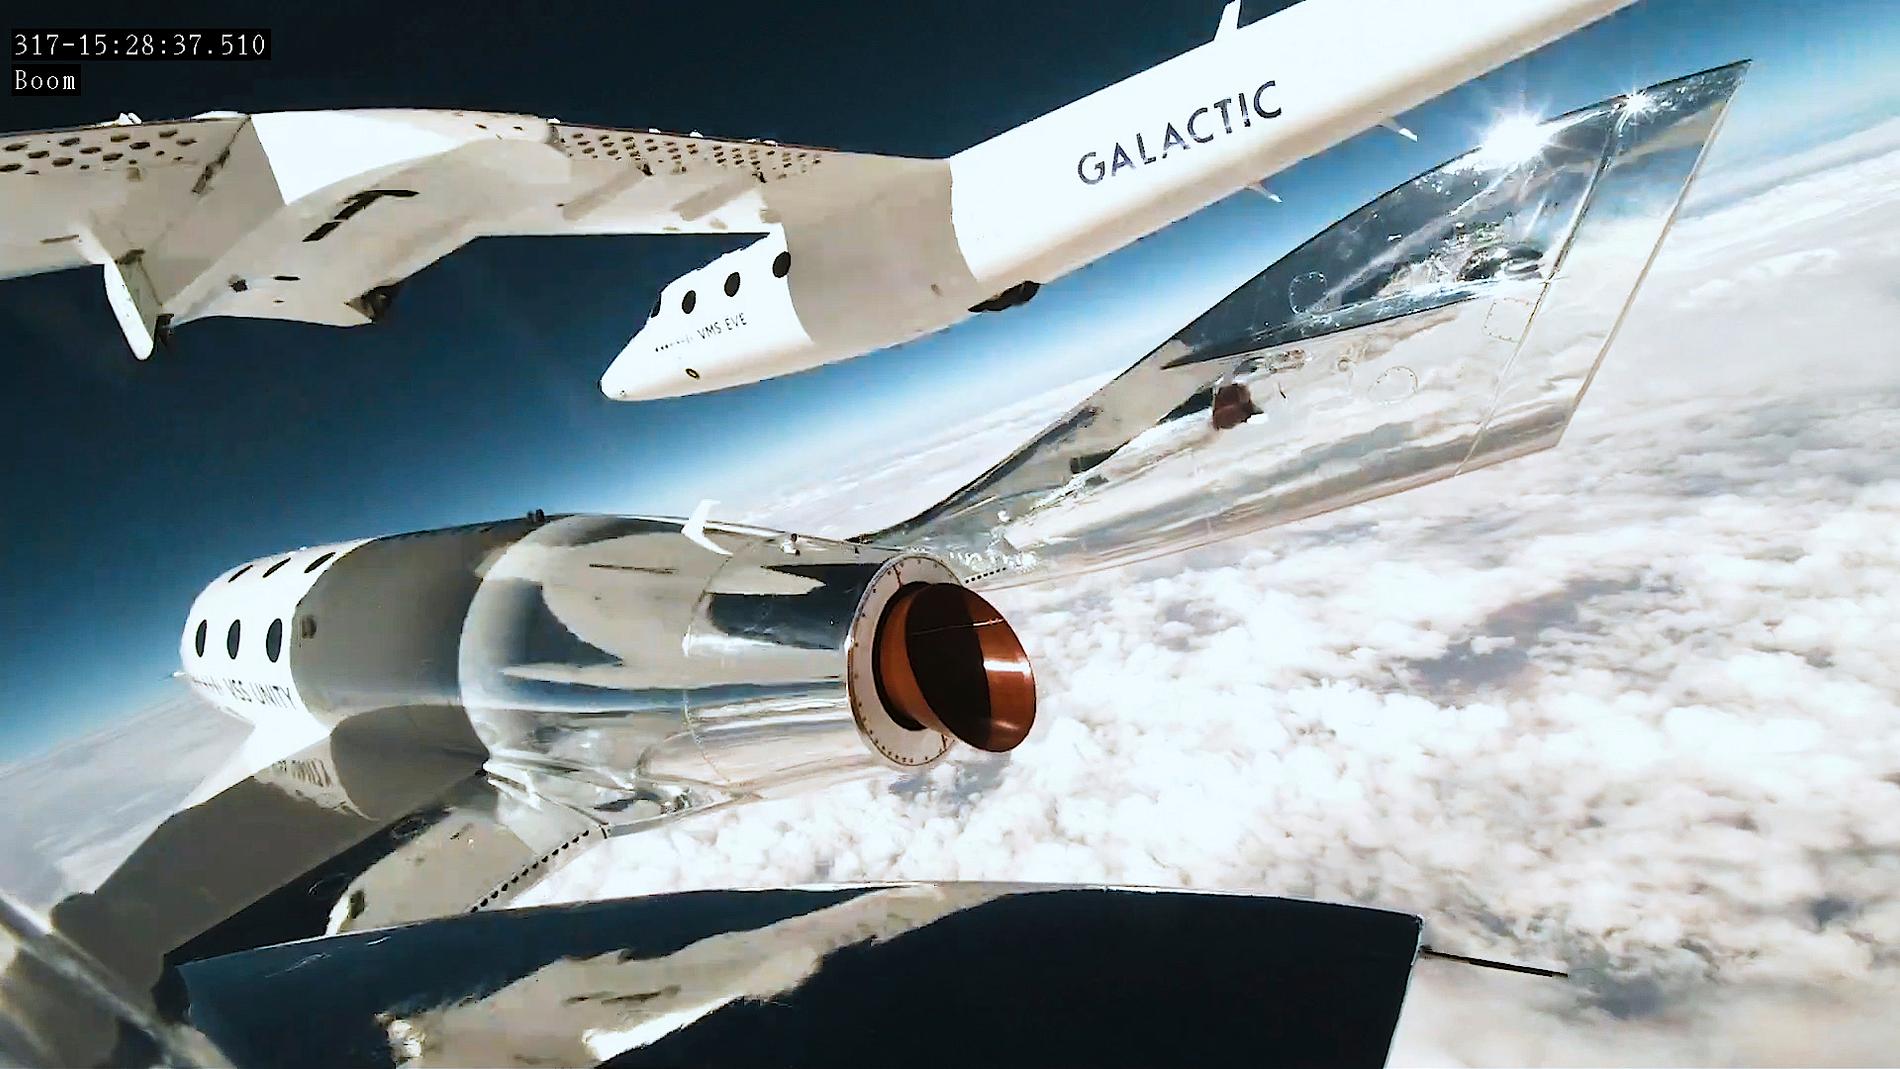 Virgin Galactic has completed its first commercial space flight – E24